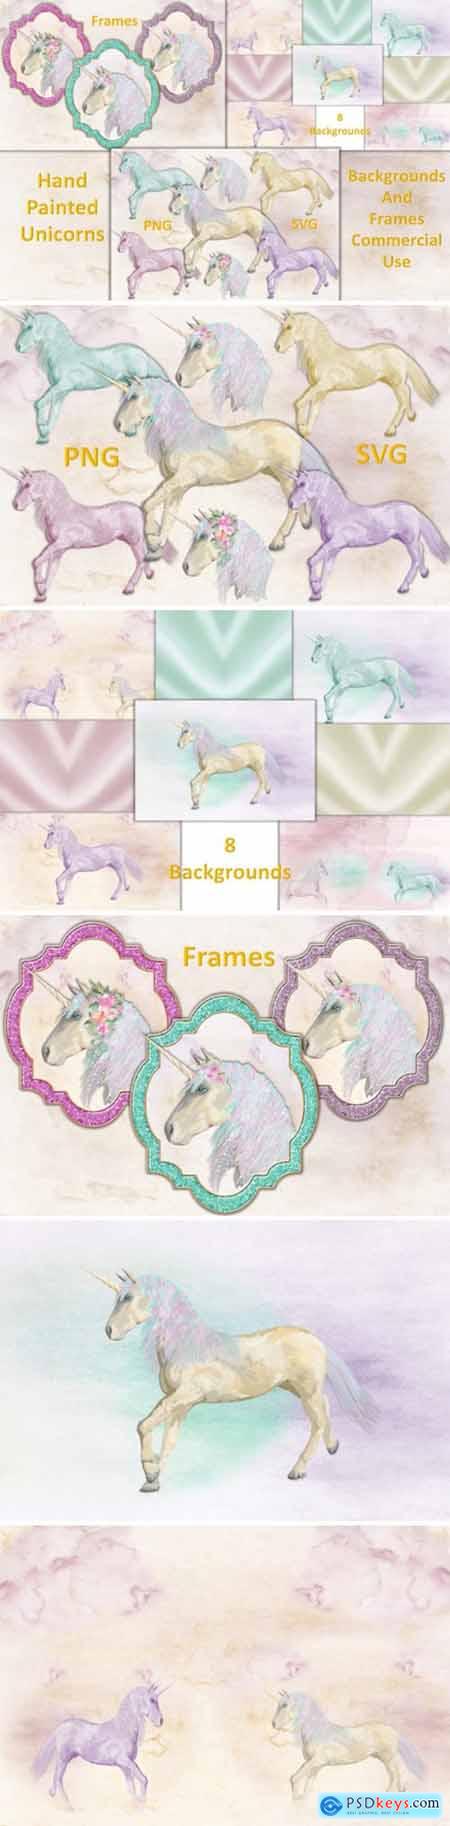 Unicorn Clipart and Backgrounds 1687023